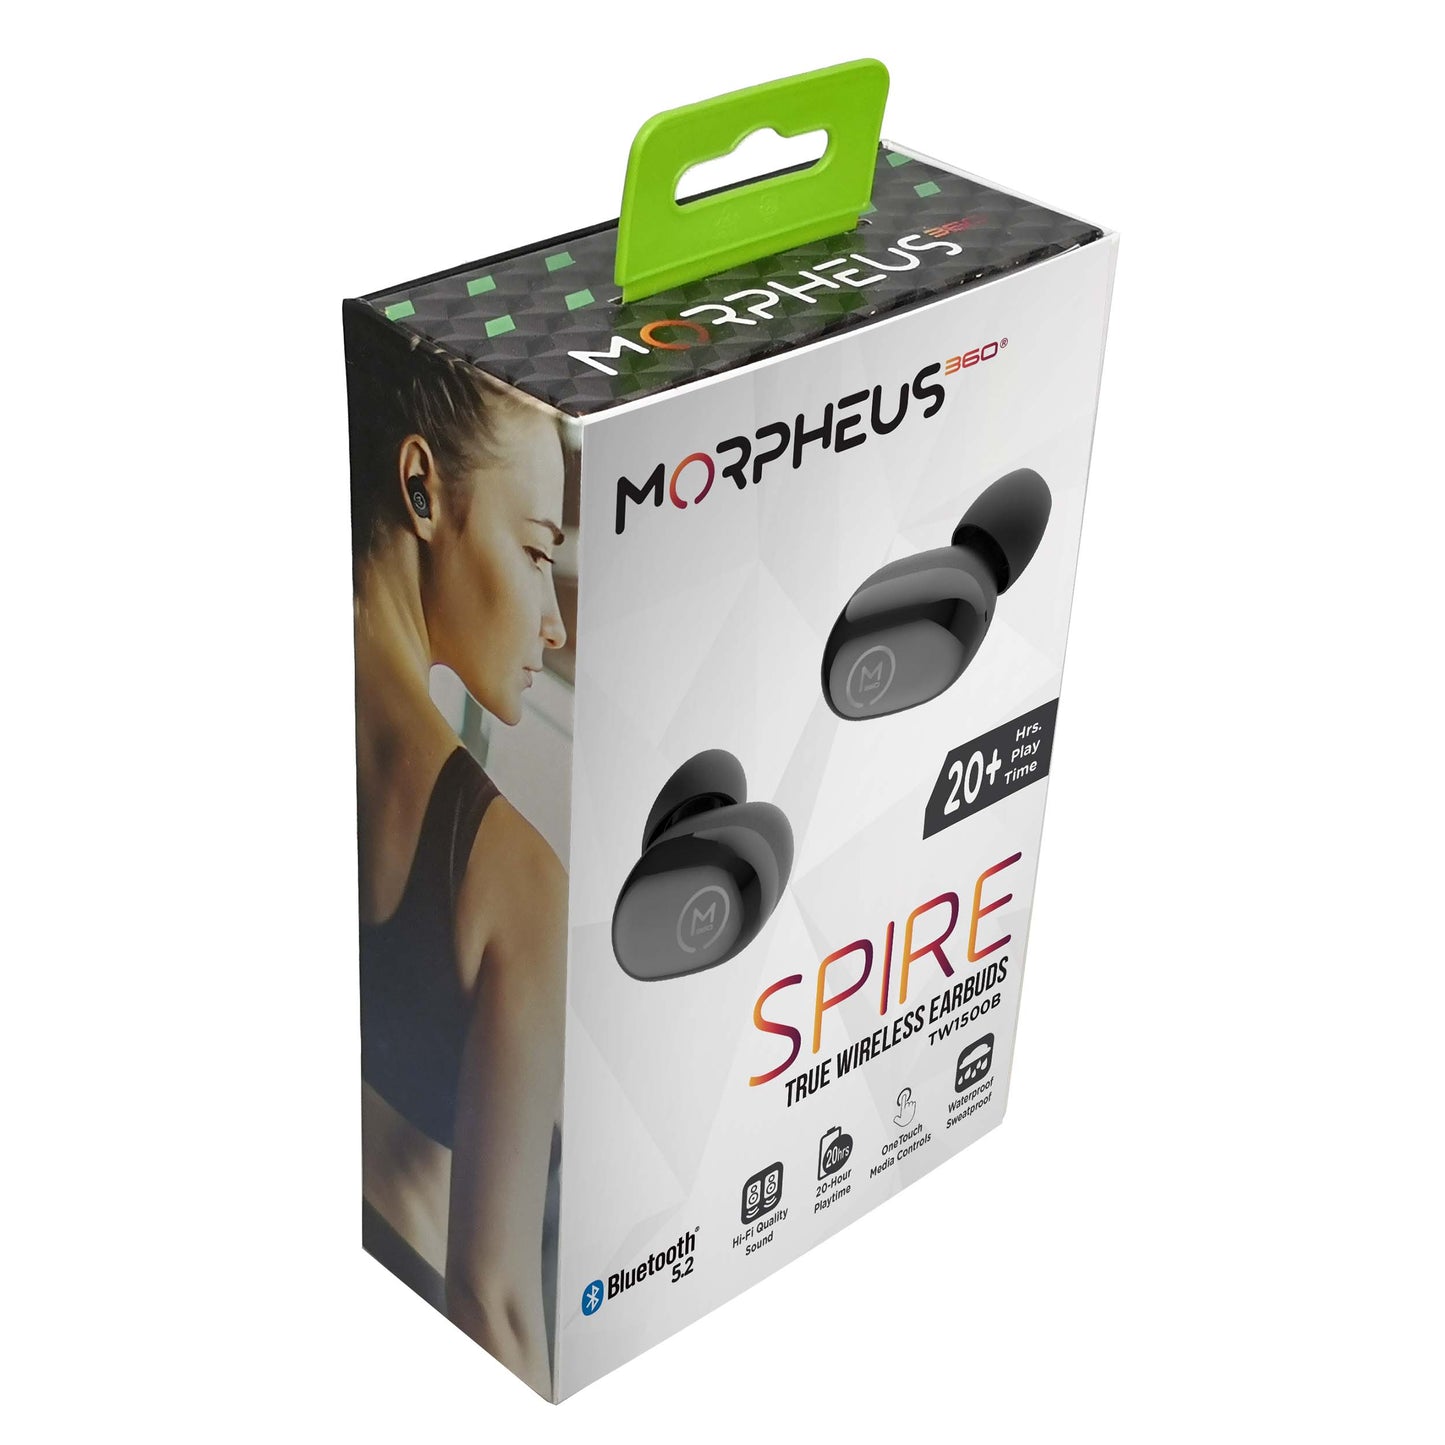 Photo of Morpheus 360 Spire True Wireless Earbuds Retail packing, Black left and right earbuds with features: Bluetooth 5.2, 20+ Hours of Playtime, Hi-Fi Quality Sound, One Touch Media Controls, Waterproof/Sweatproof.